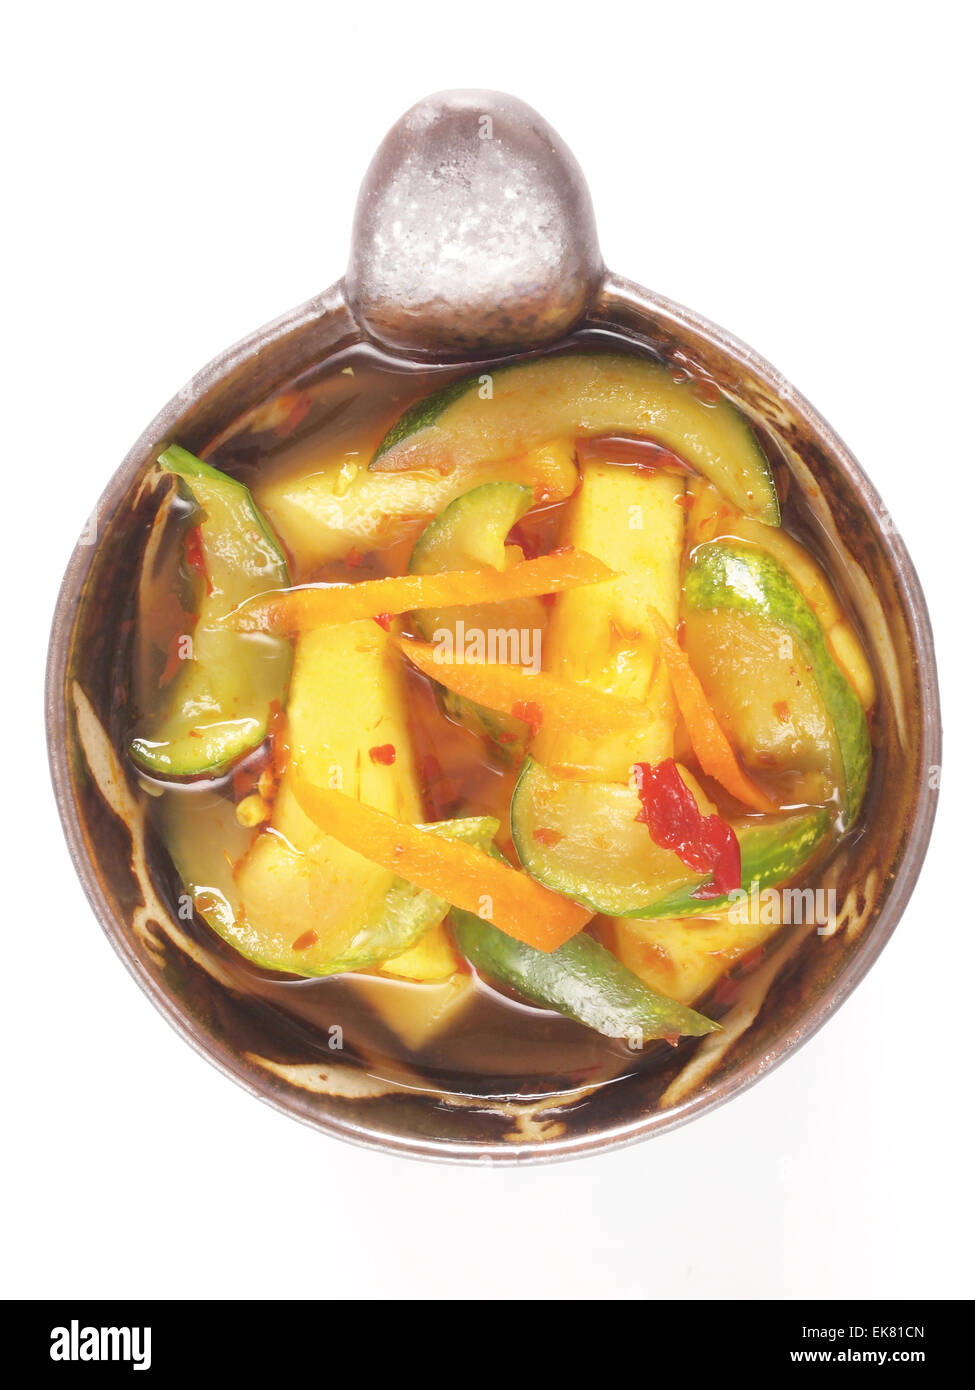 Achar Cut Out Stock Images & Pictures - Alamy